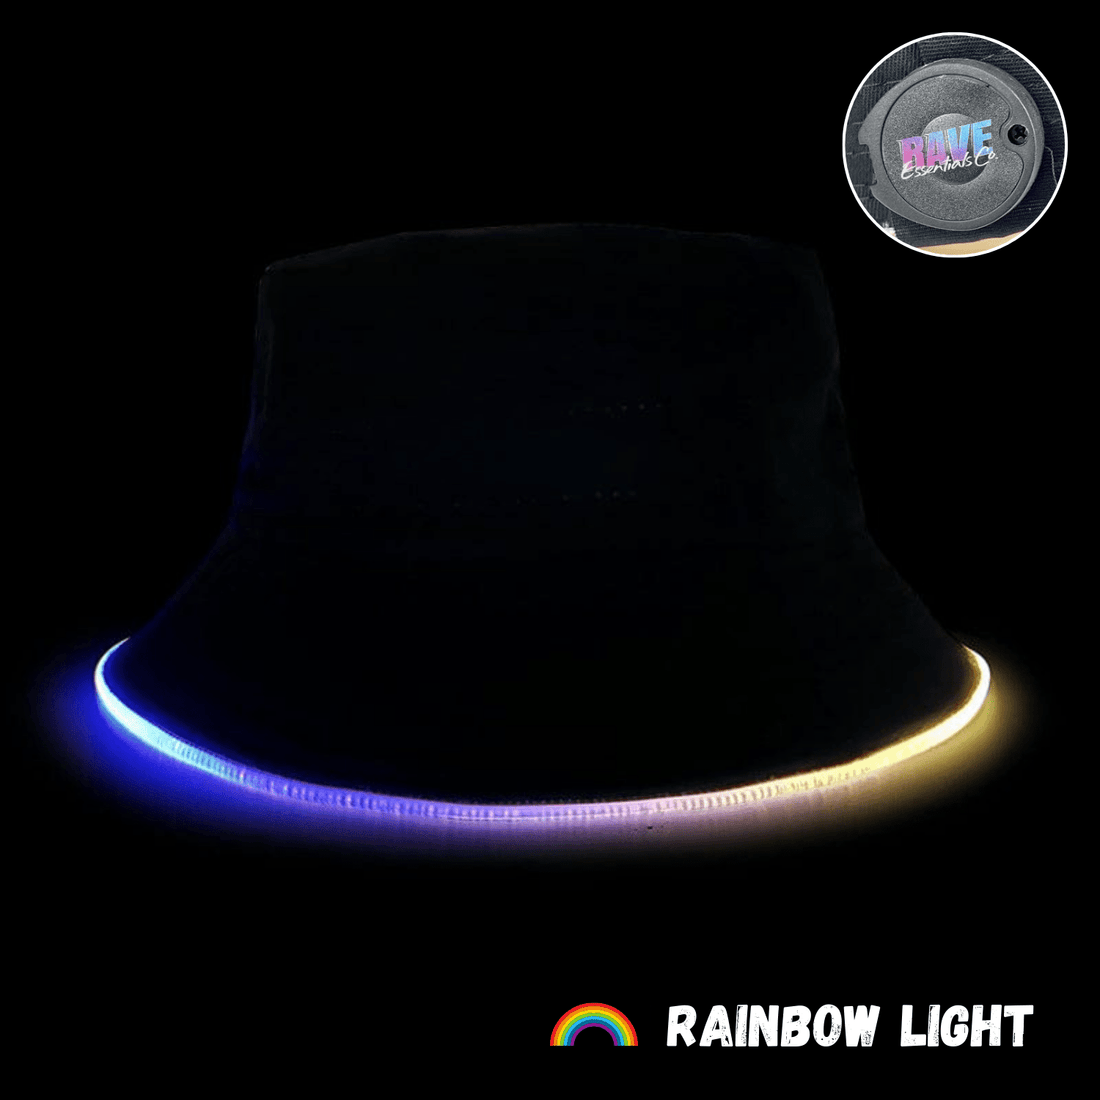 Rave Essentials Co. Limited Edition Rainbow Unisex Color Changing Luminus™ LED Bucket Hat